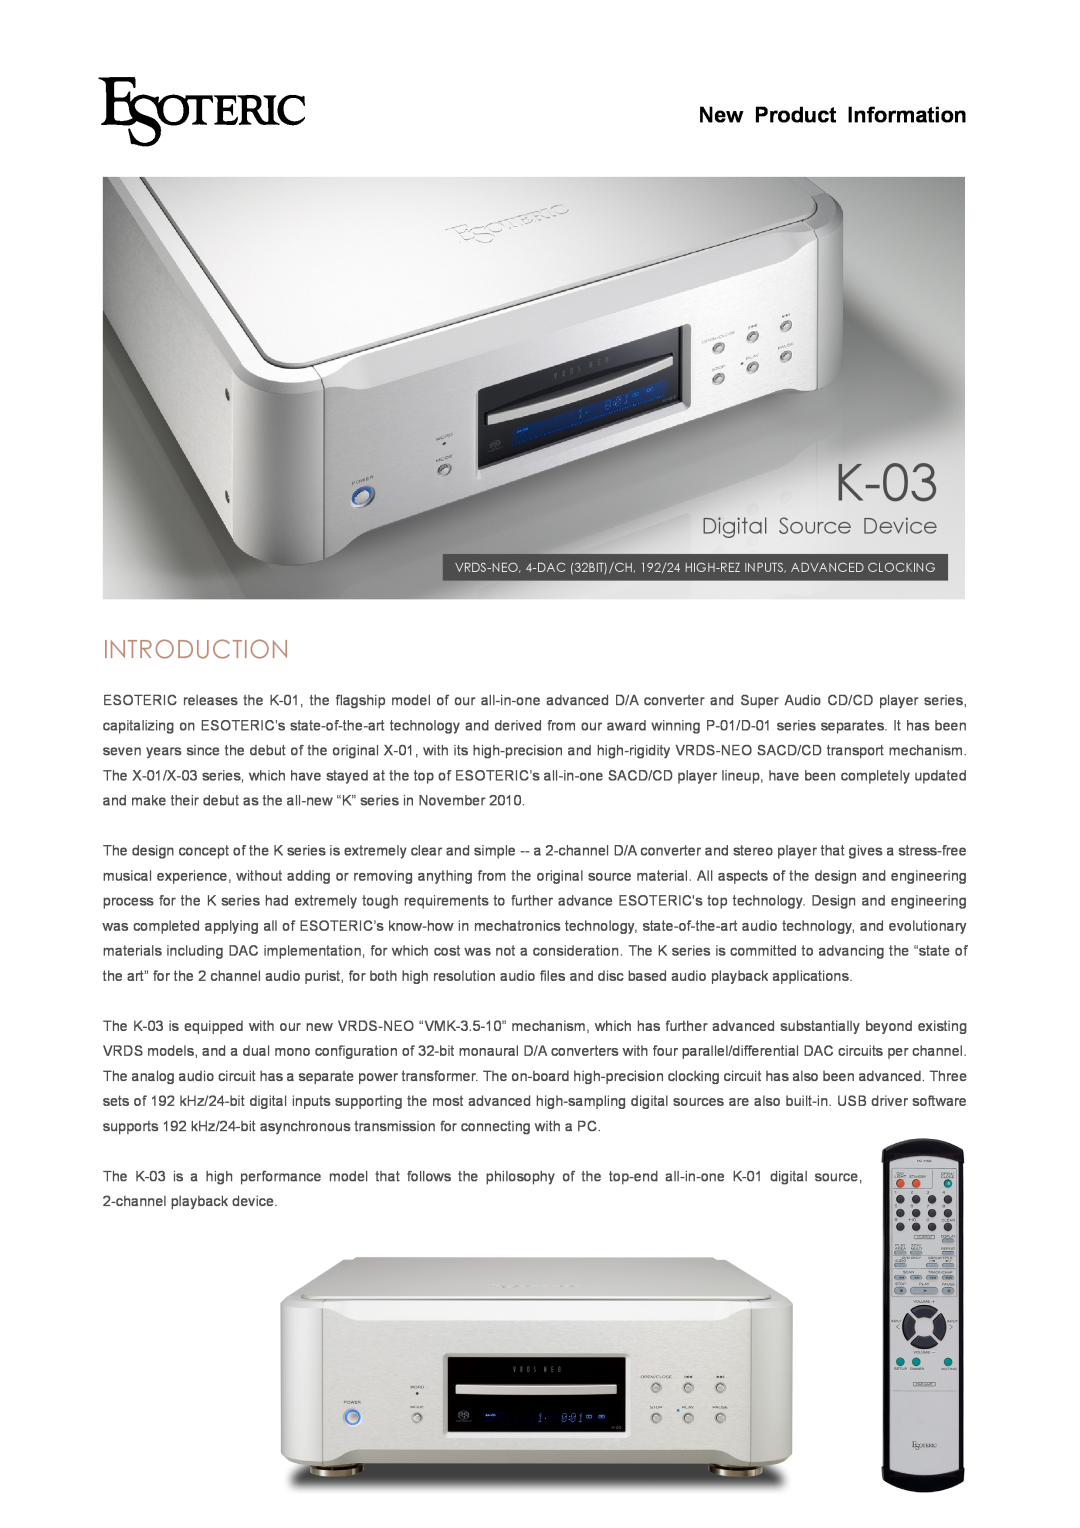 Esoteric K-03 manual Introduction, New Product Information, Digital Source Device 